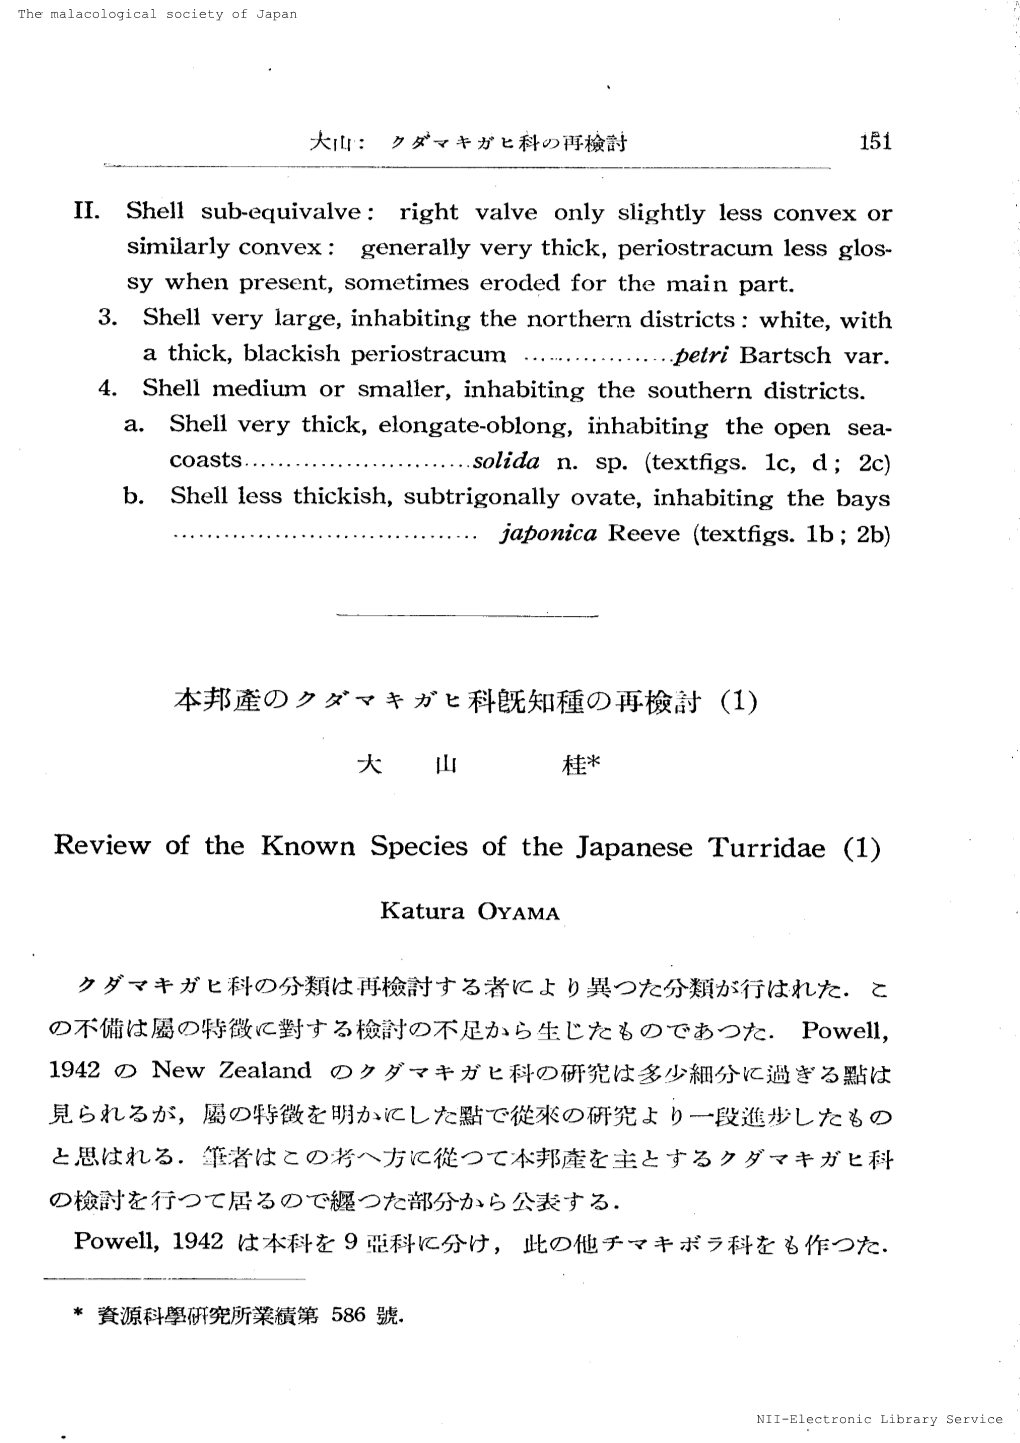 Review of the Known Species of the Japanese Turridae （1）